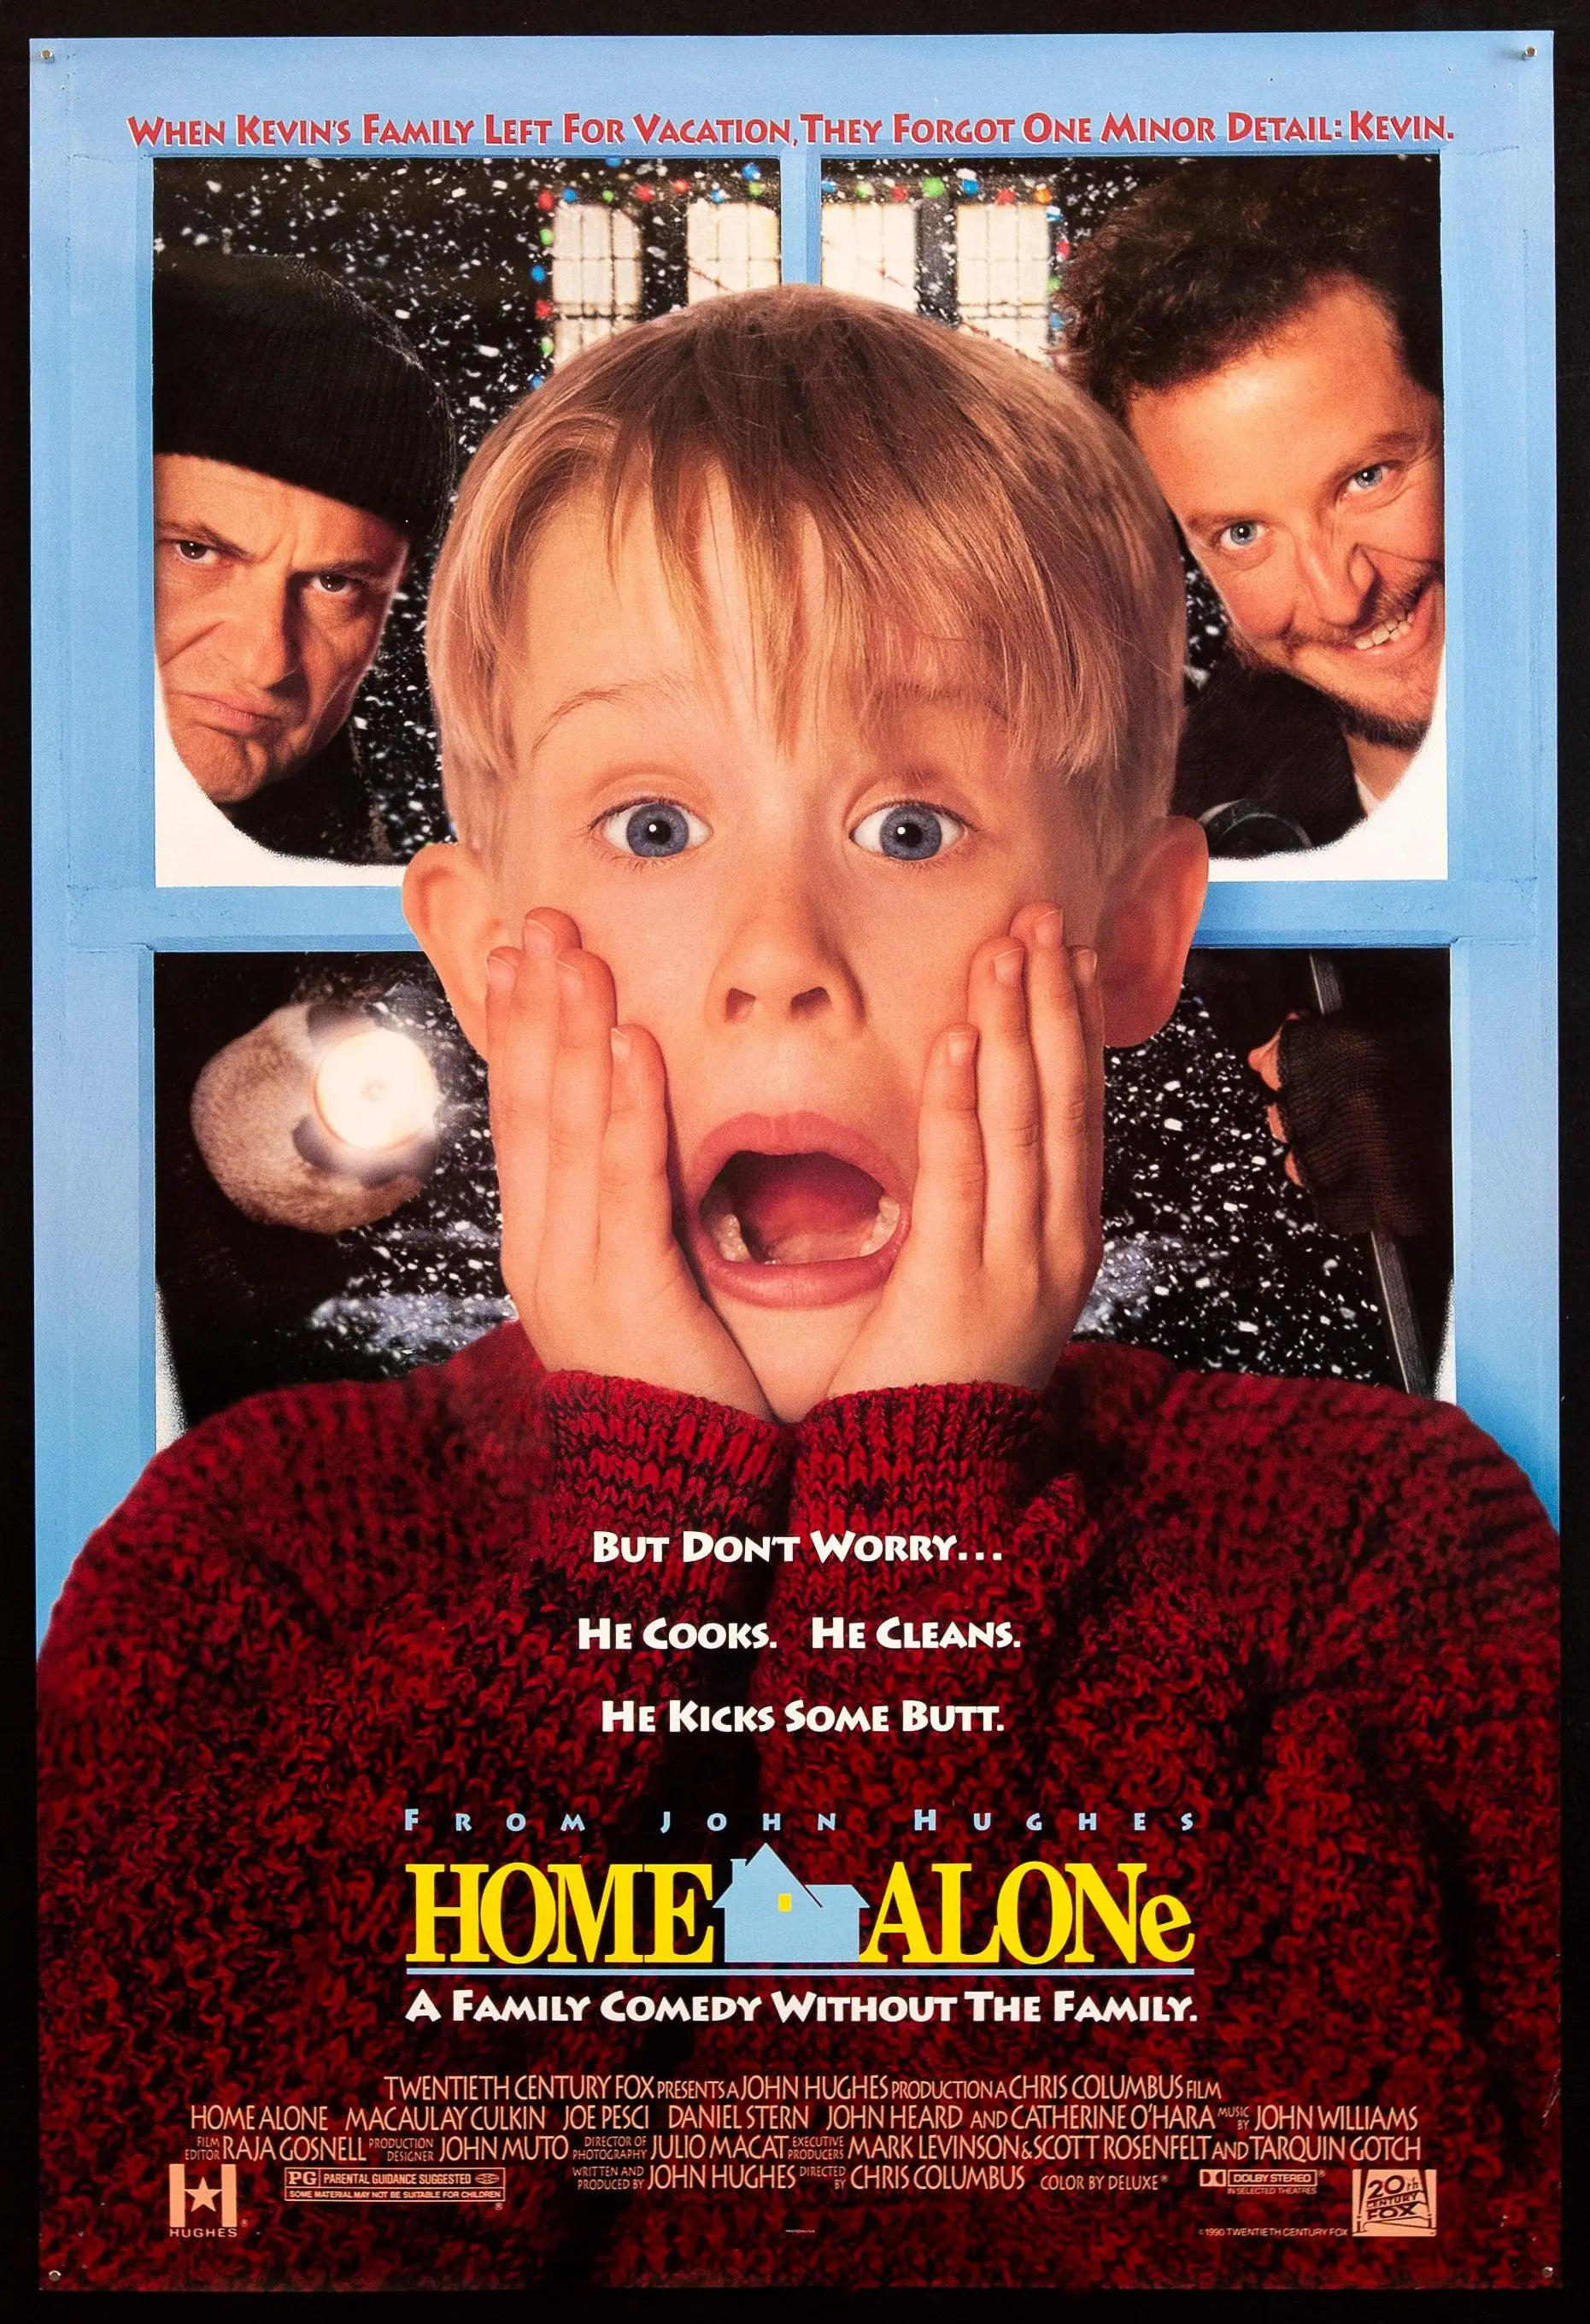 A movie poster of a child with his hands on his cheeks

Description automatically generated